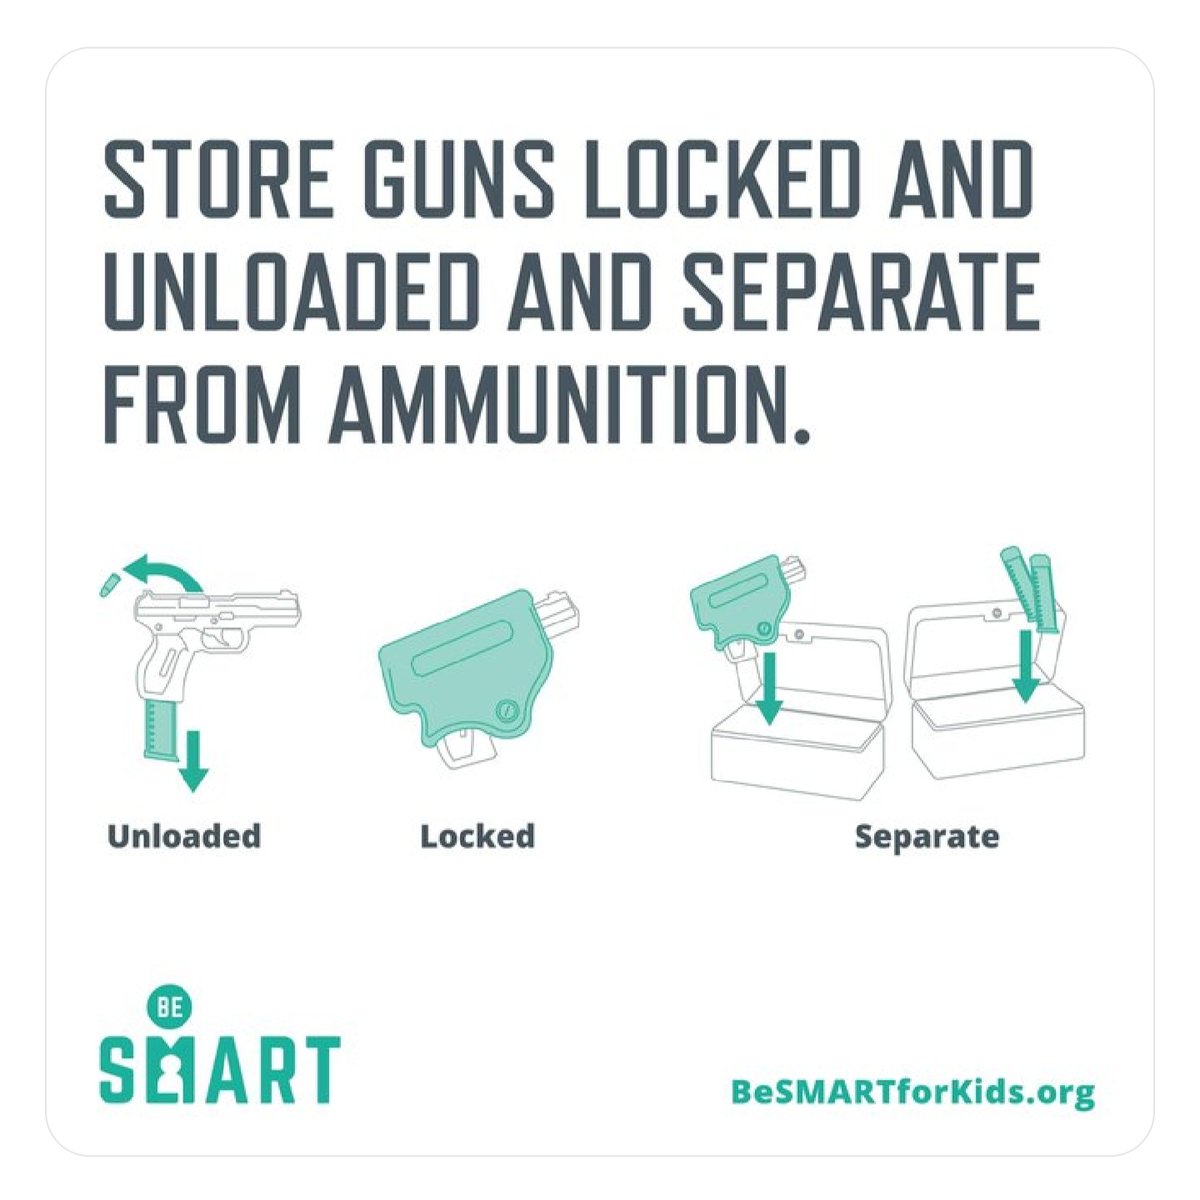 Too often. People if you have guns, please secure them. Safe storage is your responsibility. @MomsDemand @Everytown #EndGunViolence @beSMARTforkids